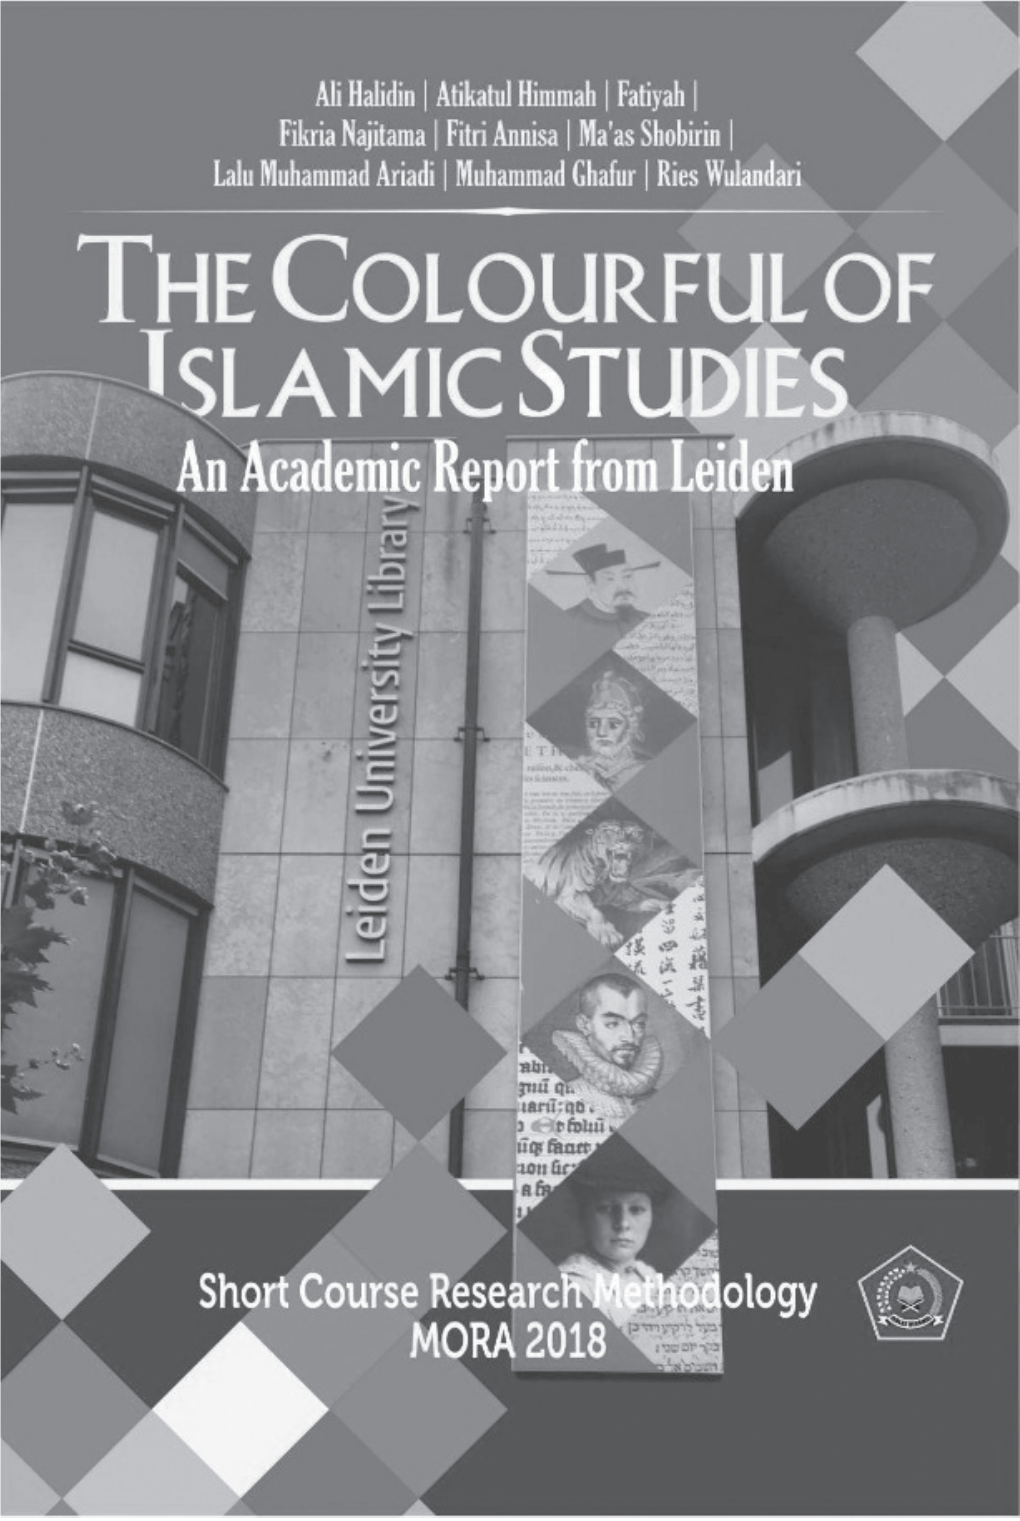 The Colourful of Islamic Studies: an Academic Report from Leiden